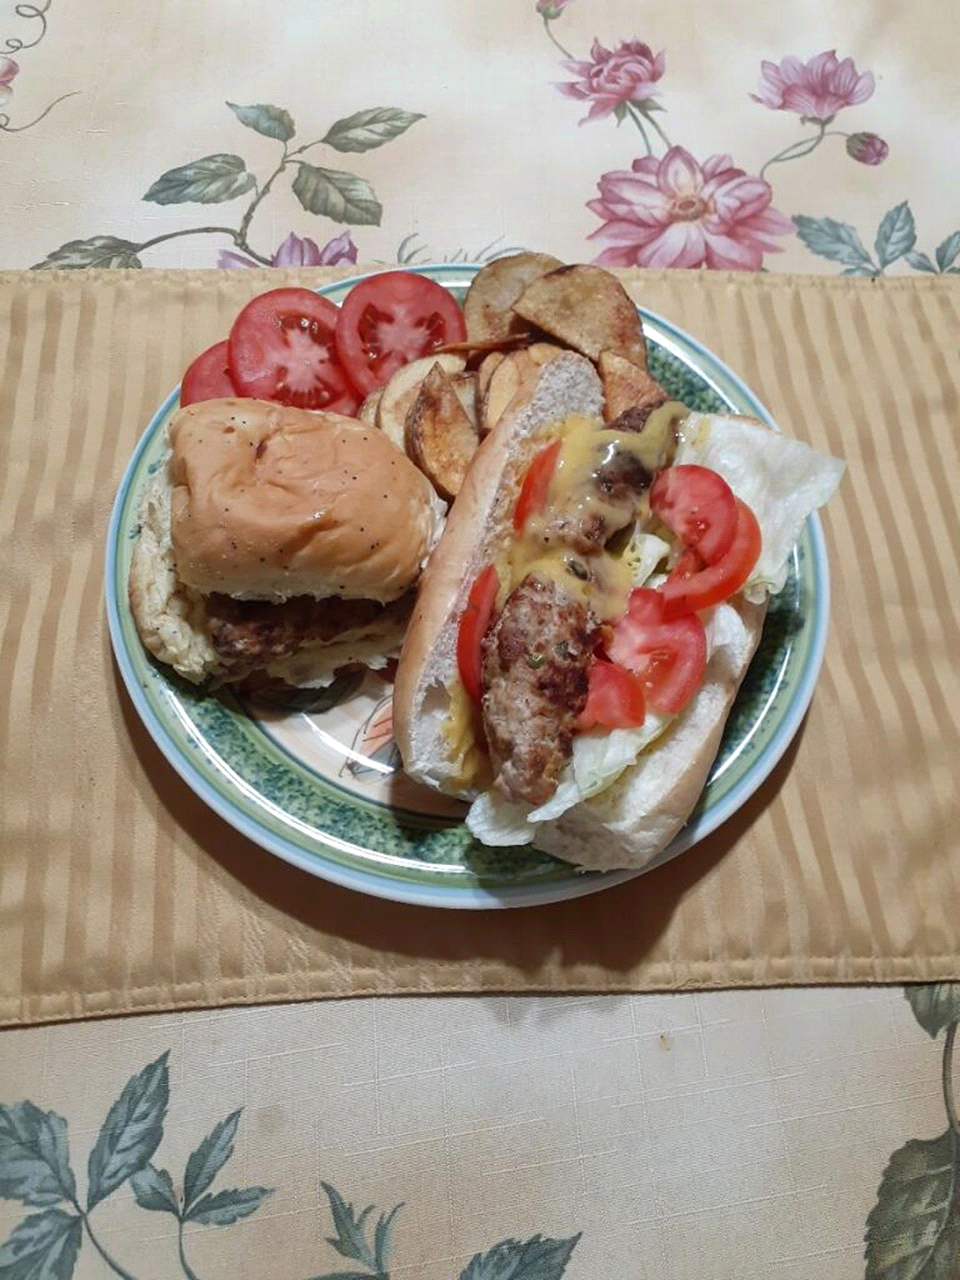 Ron’s Favorite Burger and Italian Sausage with Peppers